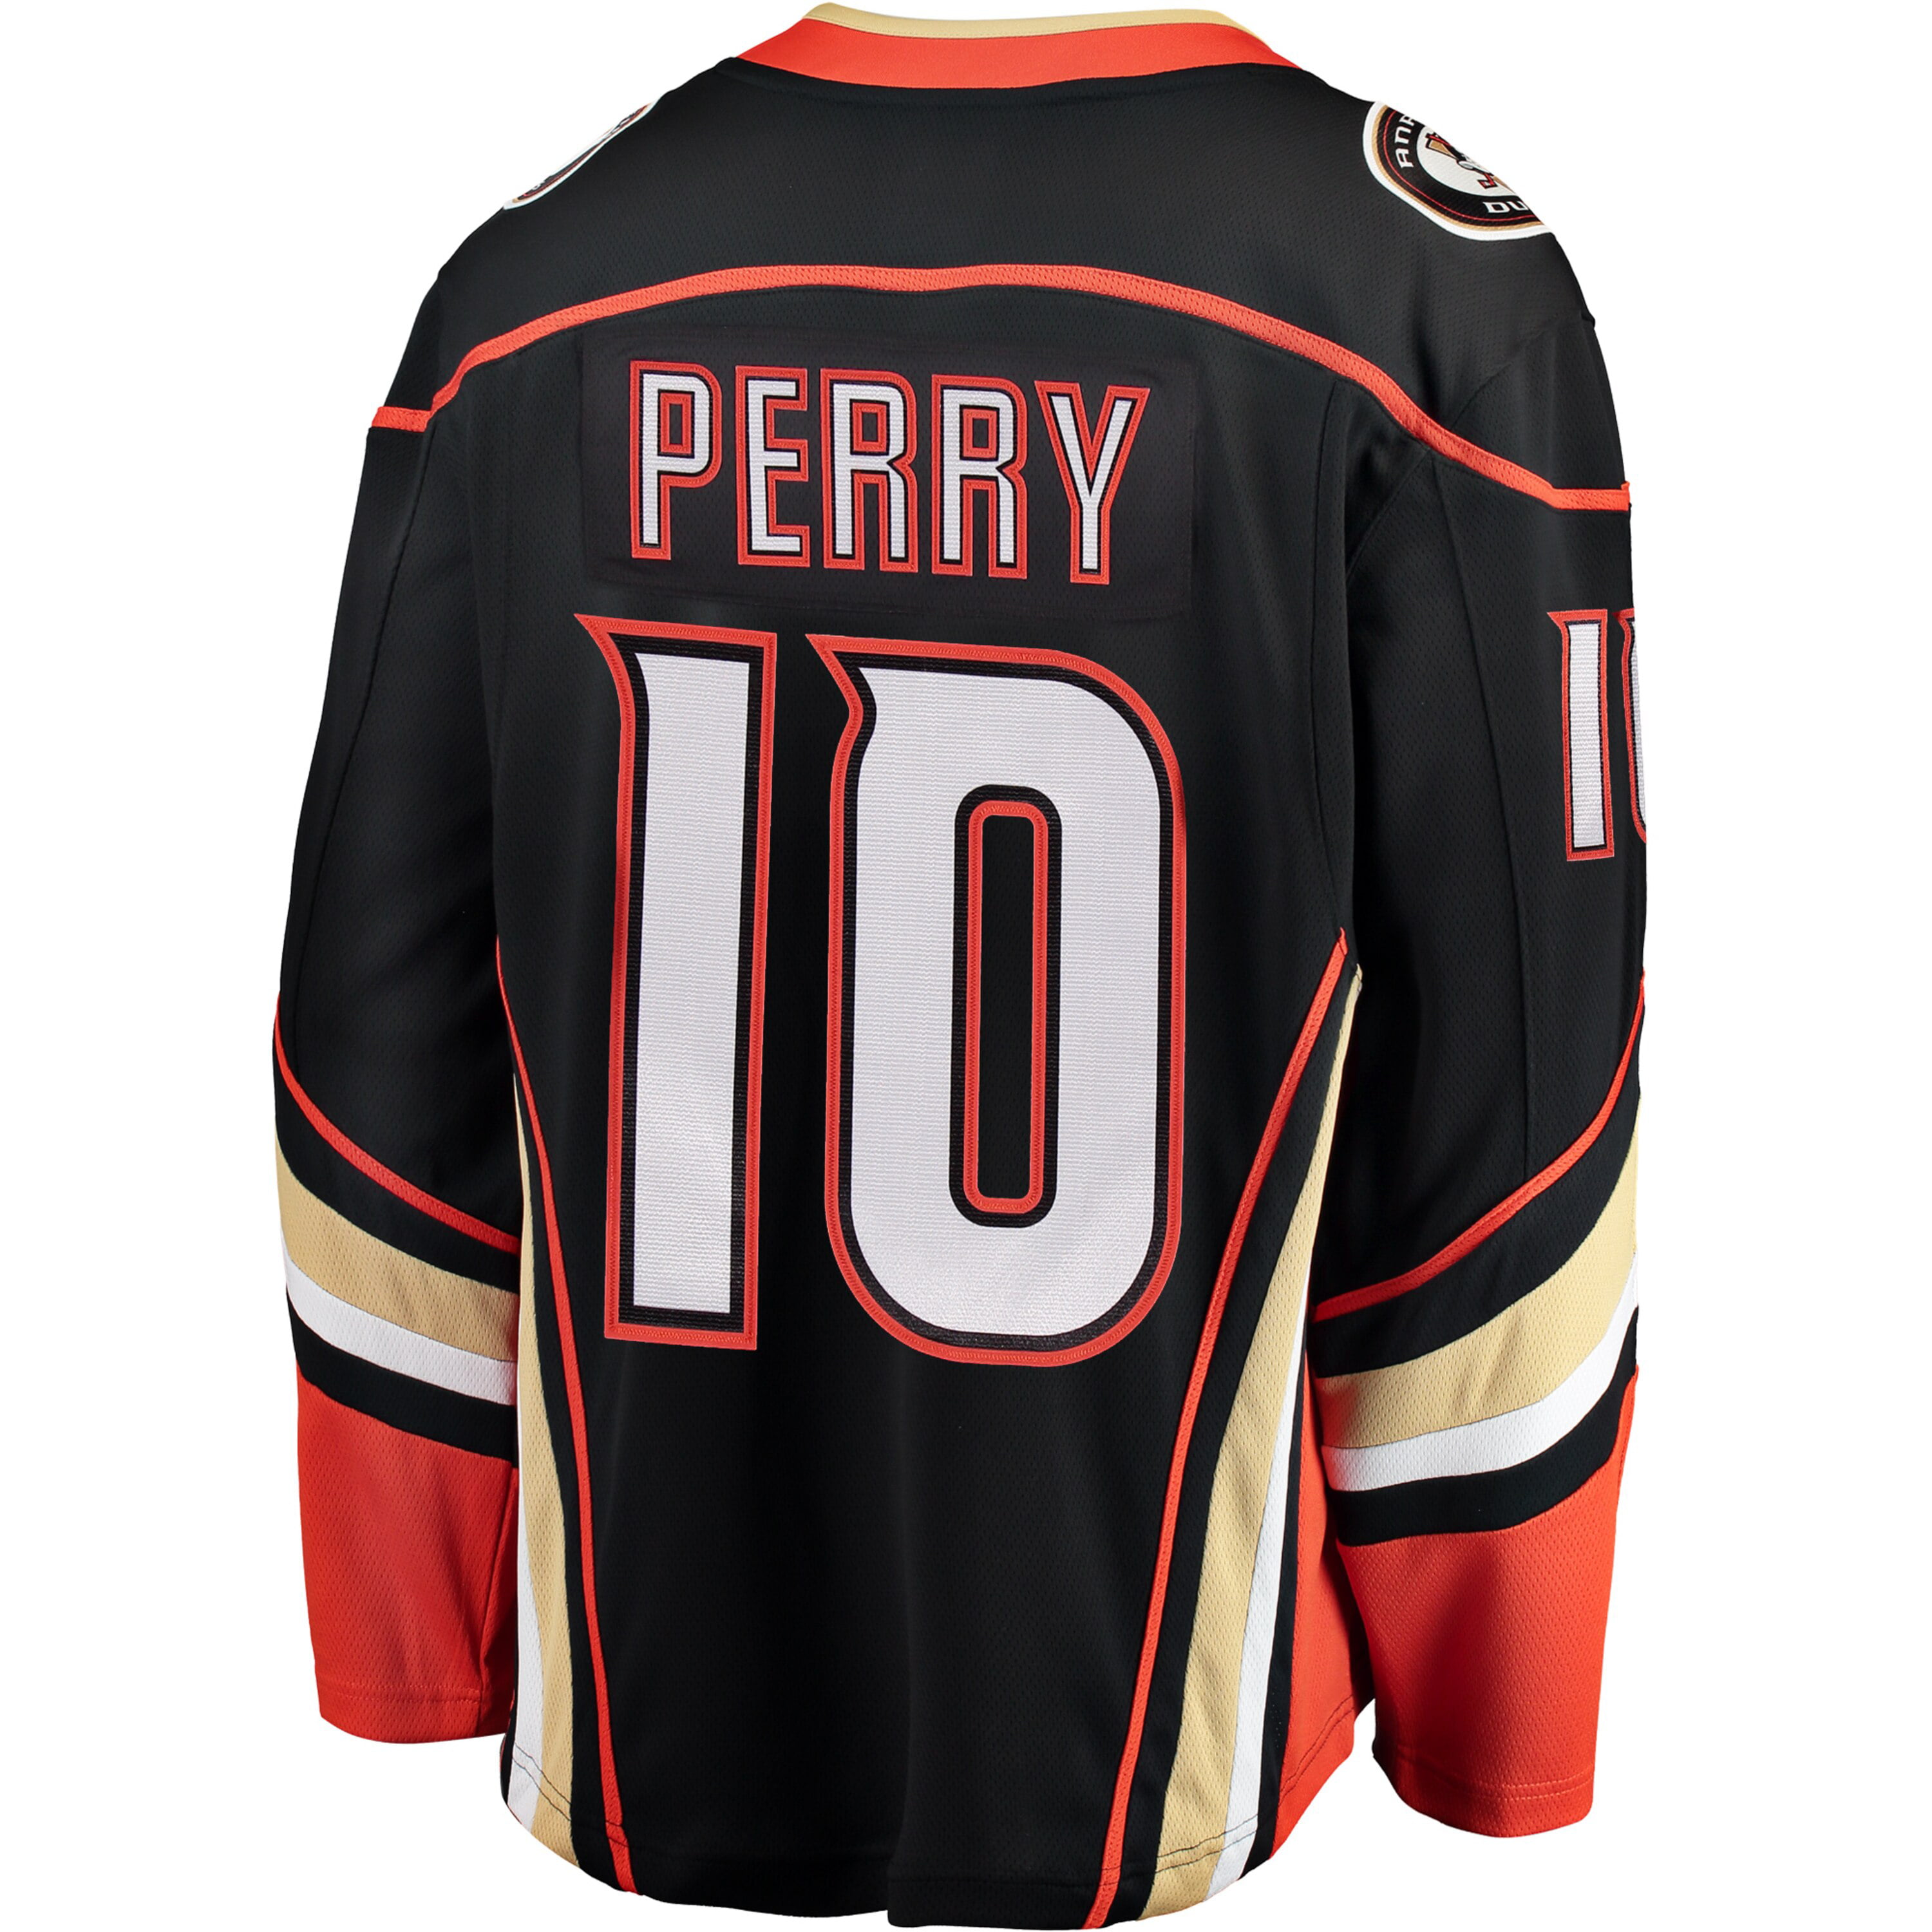 perry jersey